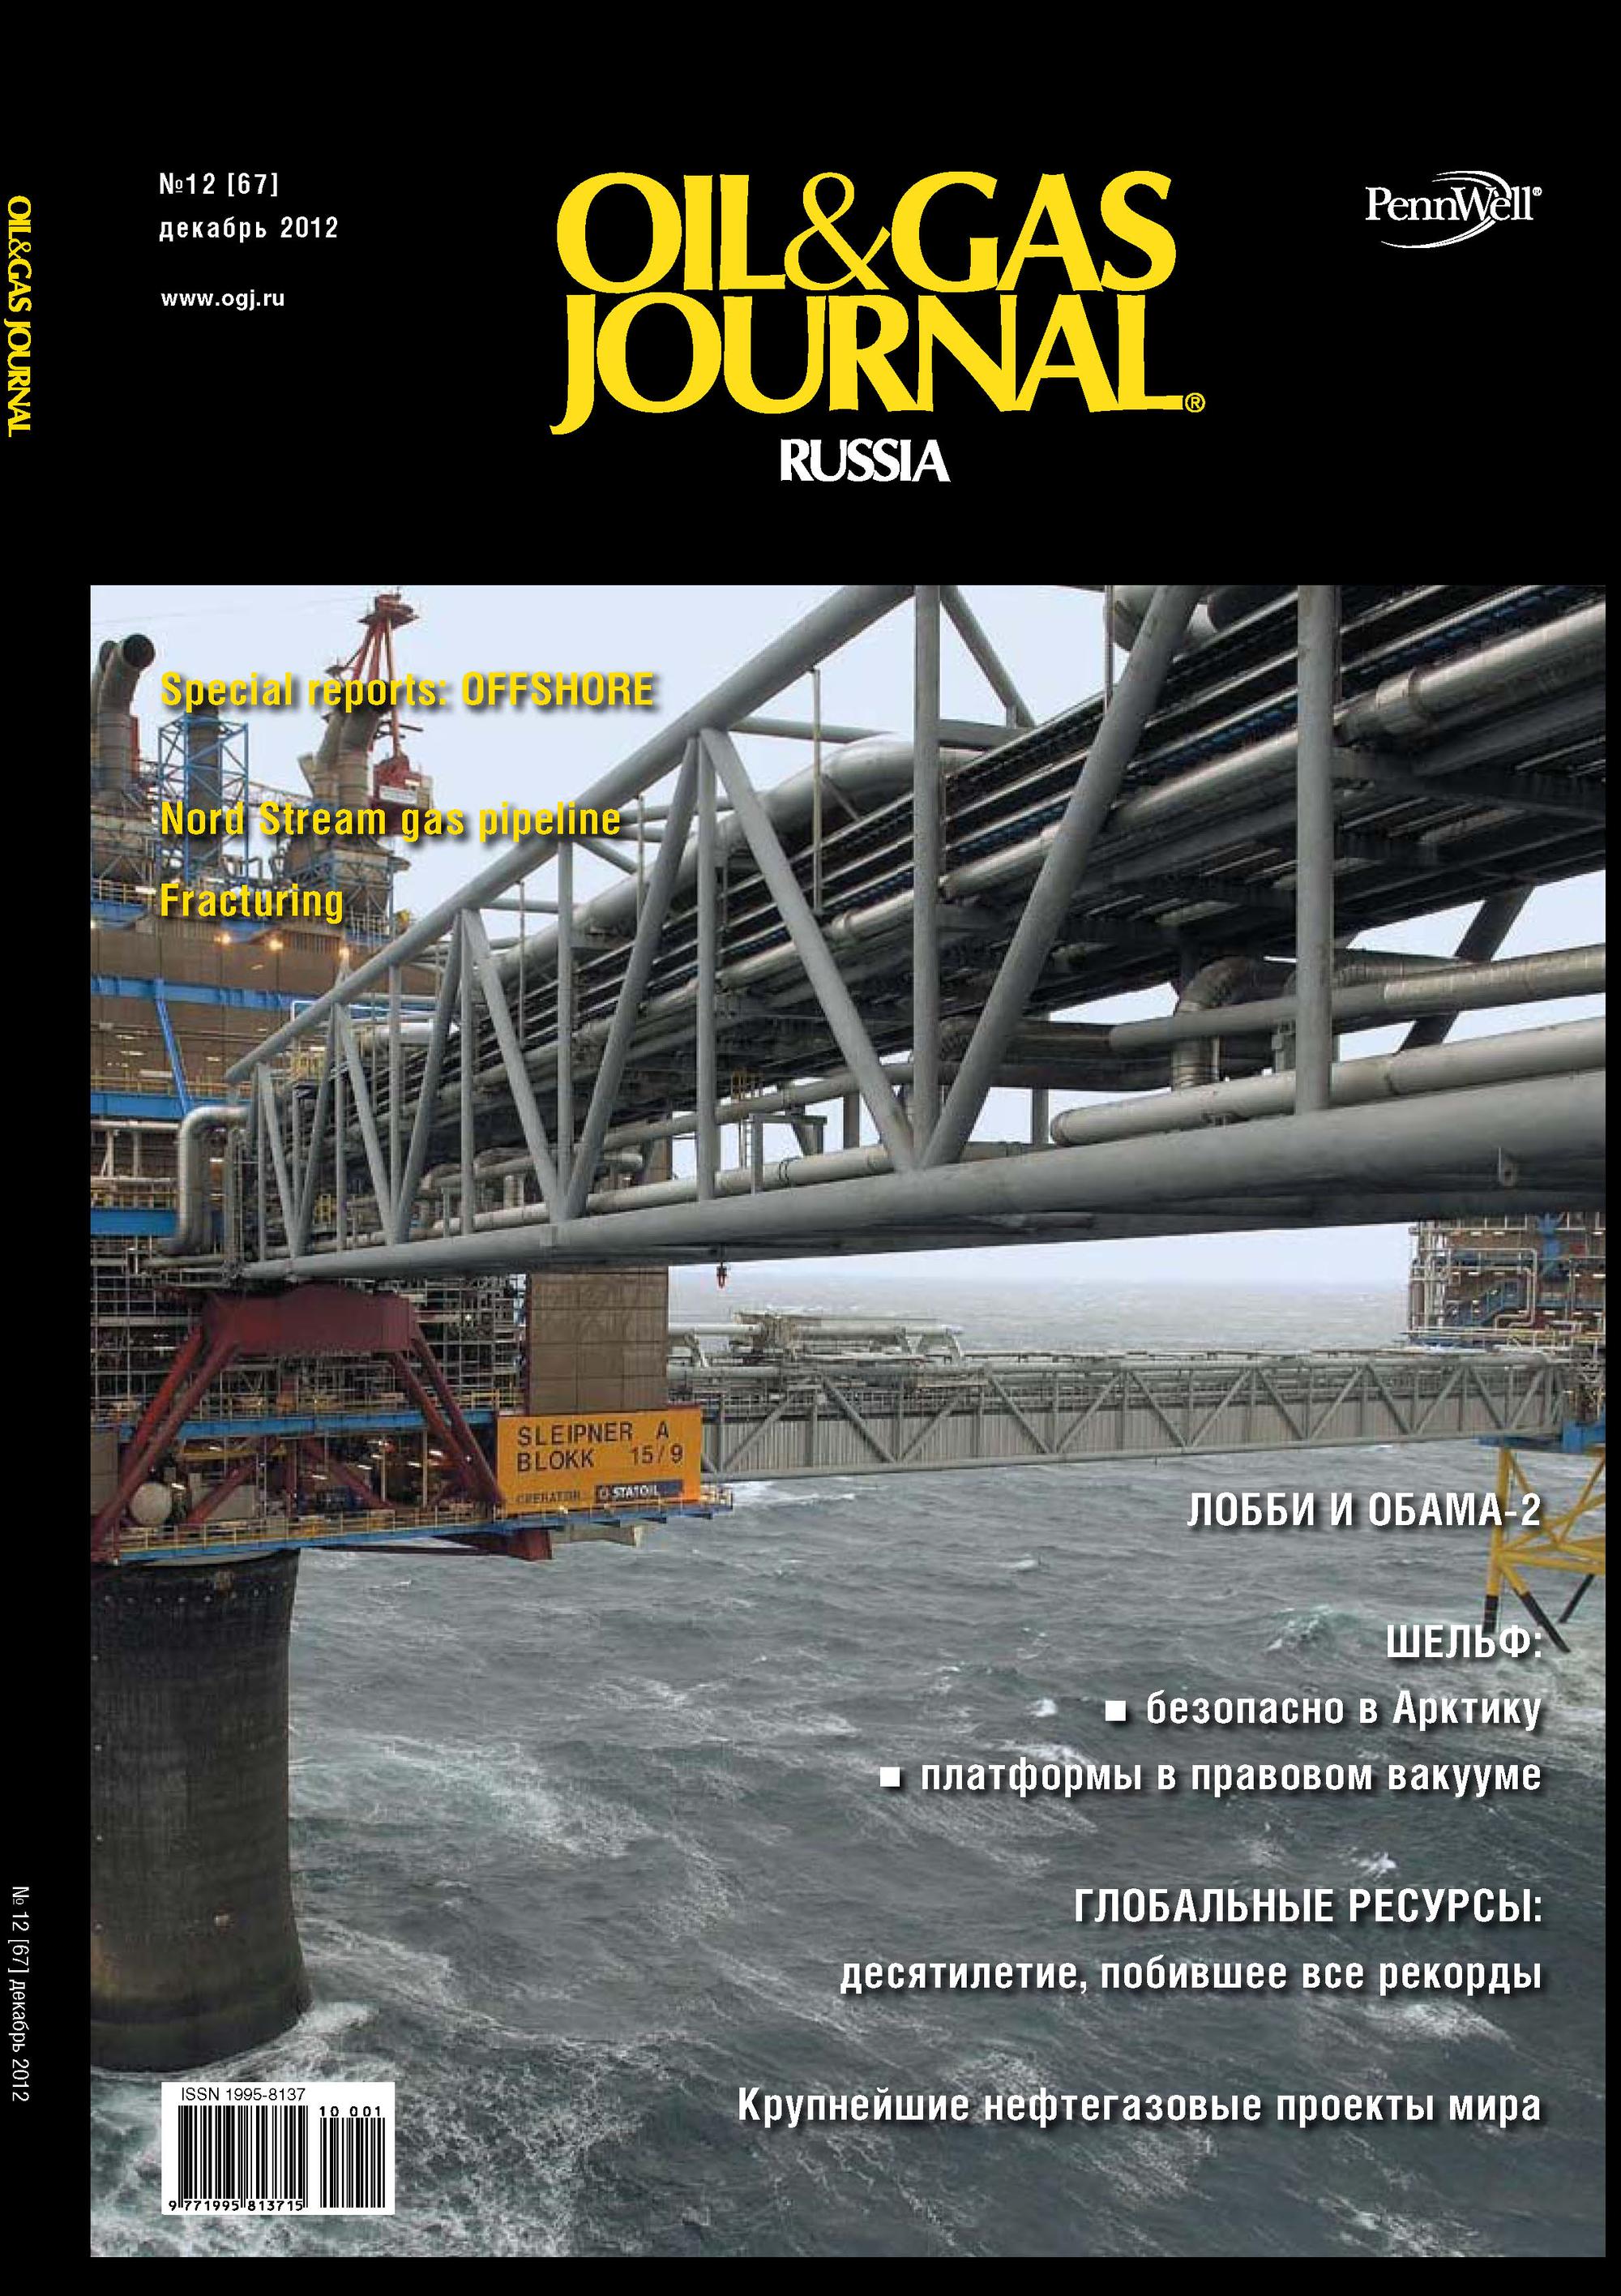 Oil&Gas Journal Russia№12/2012